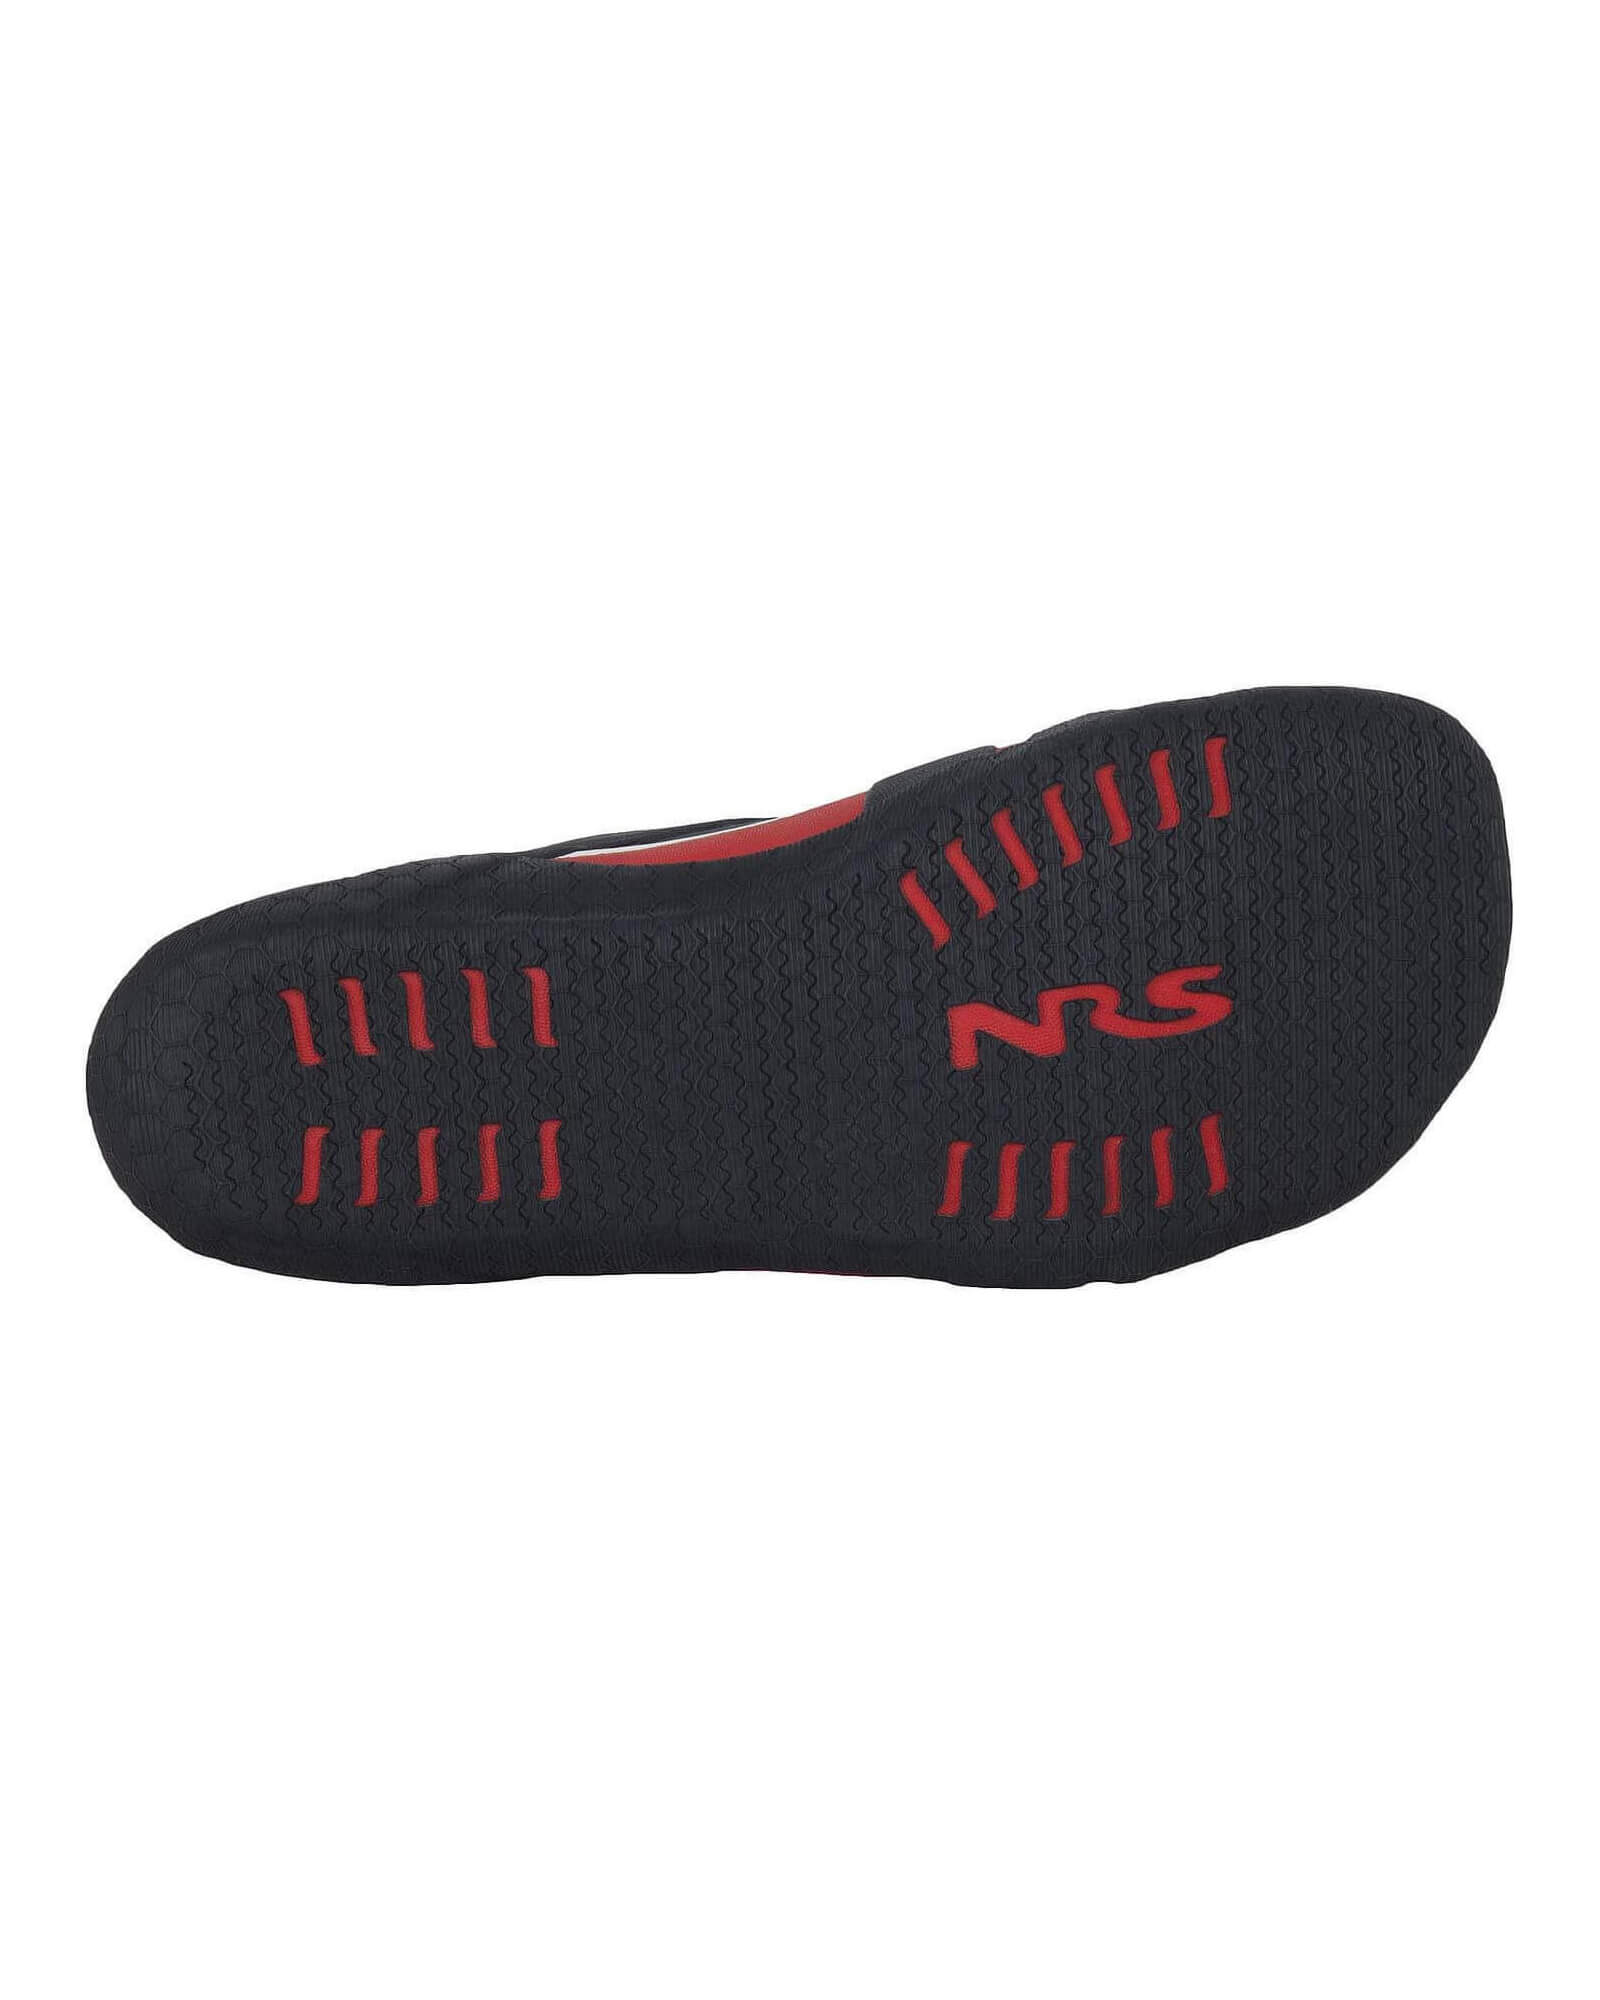 2mm NRS KINETIC Water Shoe